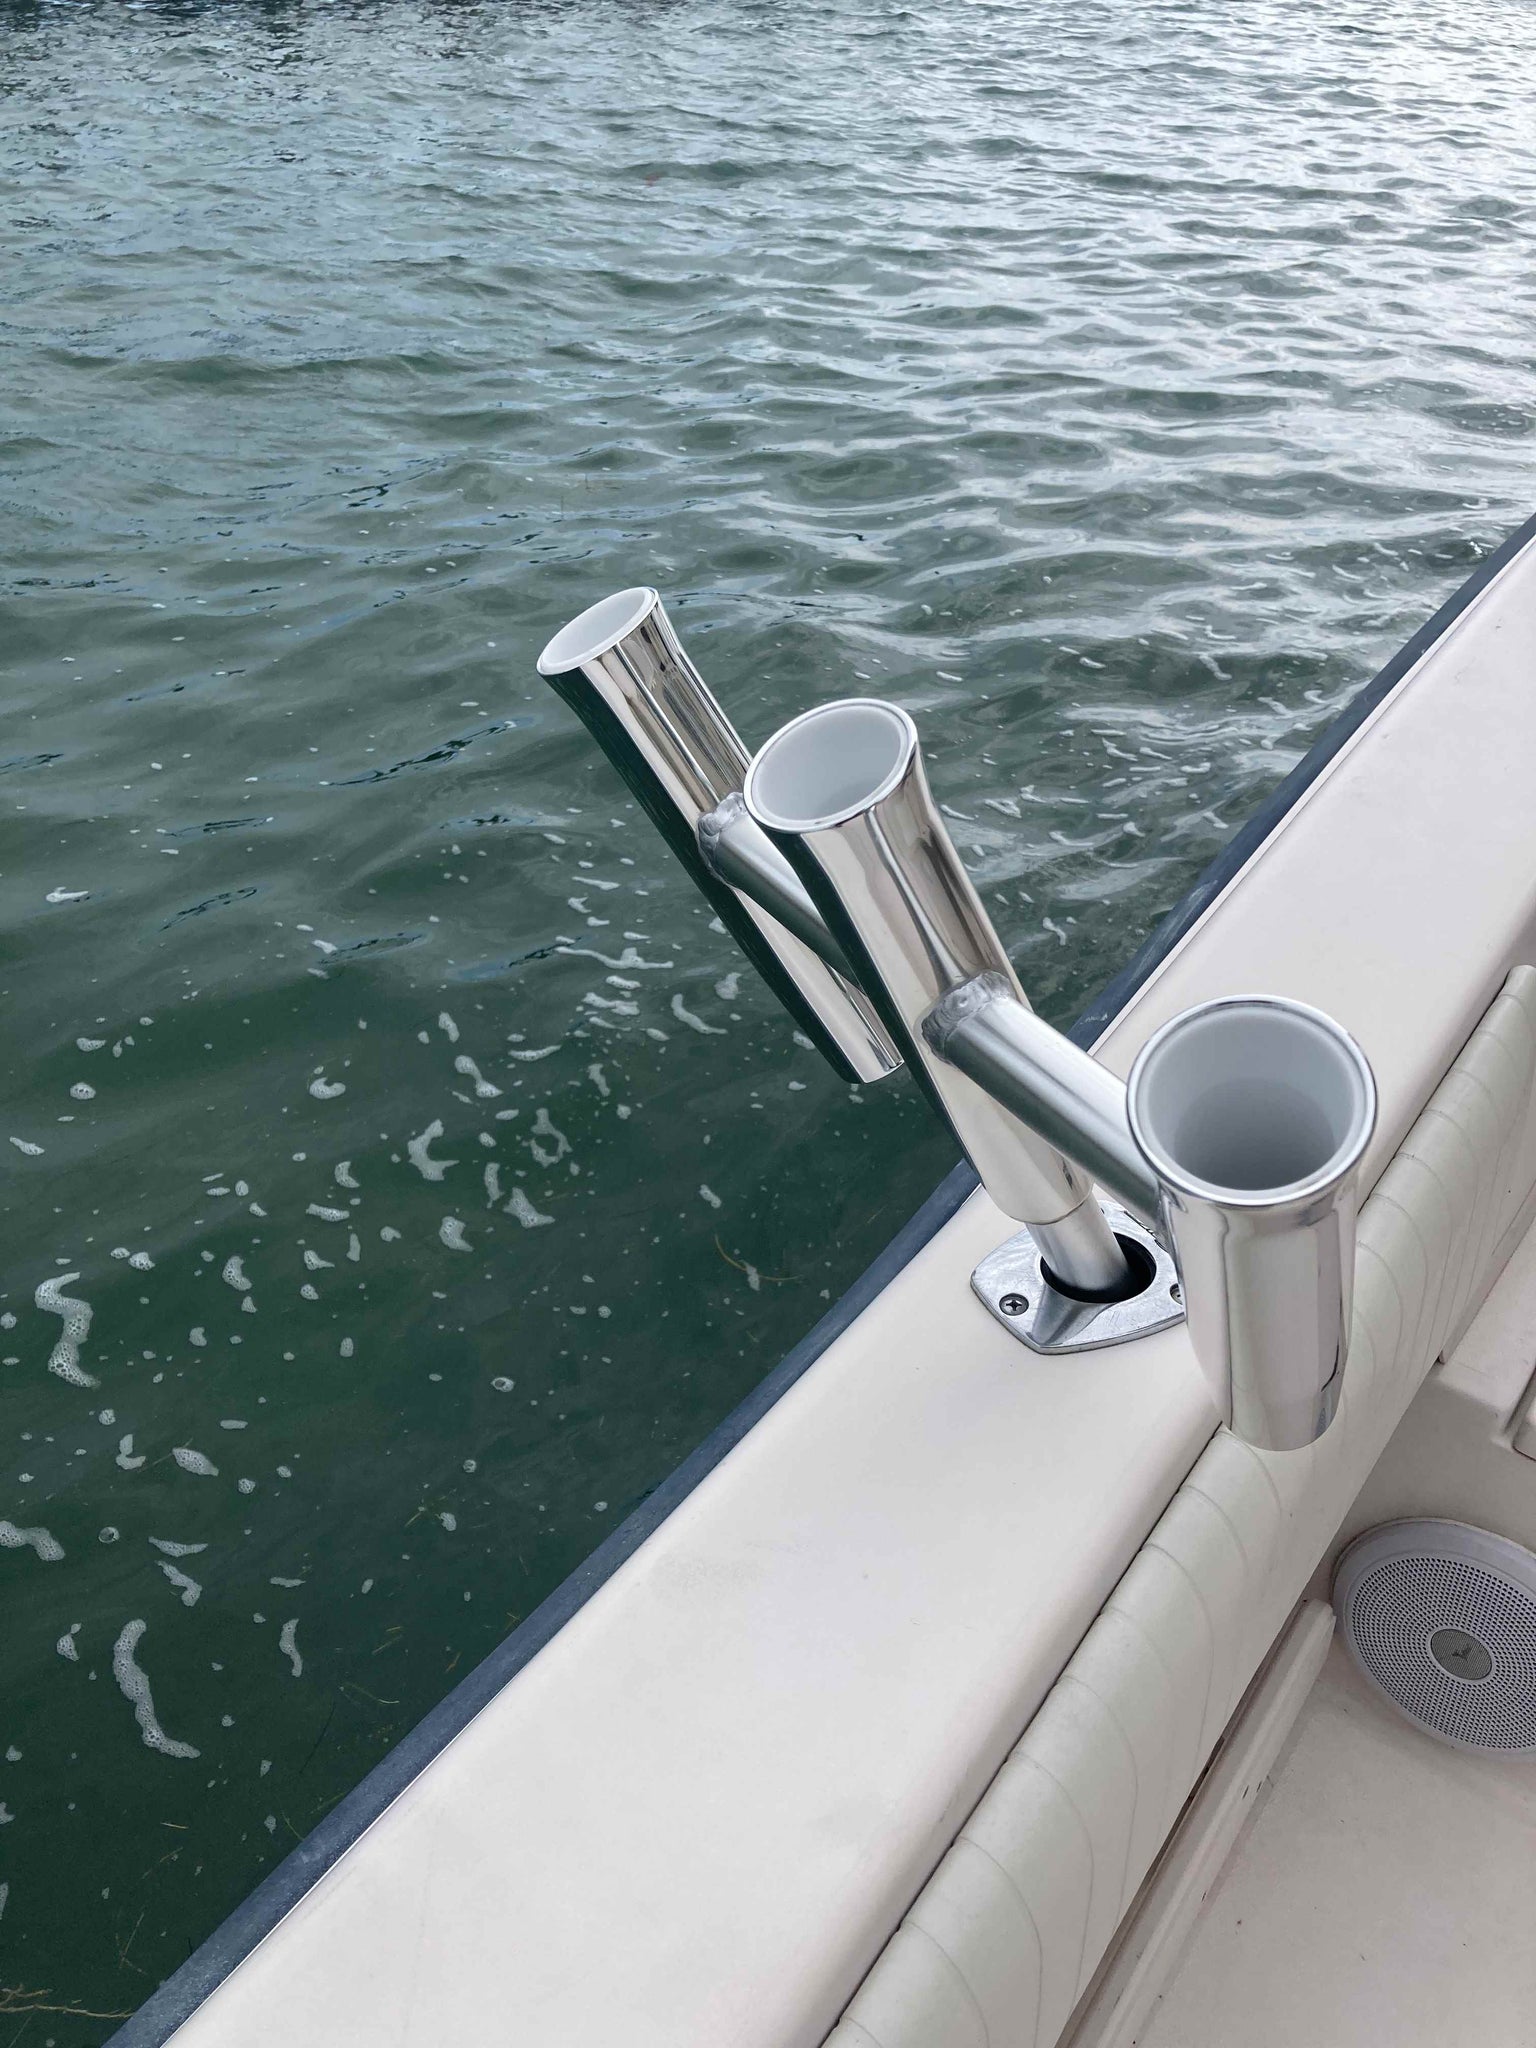 Salty Adventures 3-Way Fishing Rod Holder (Clear Anodize) - Kite Rod Holder